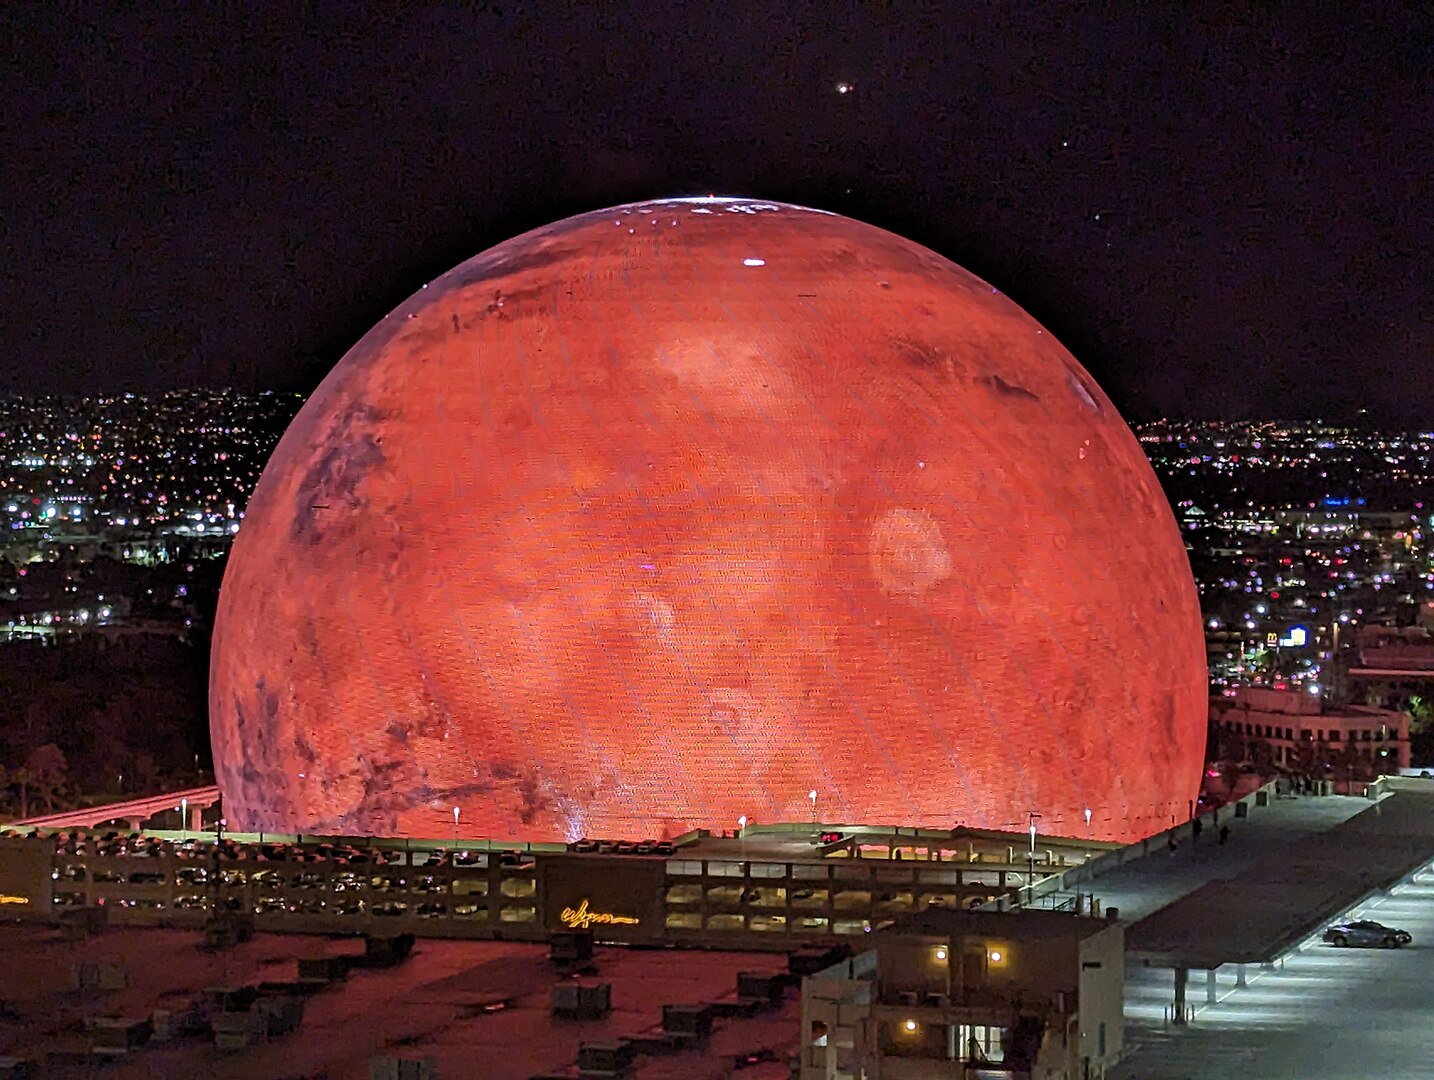 1434px-The_Sphere_as_Mars,_view_from_my_hotel_room_at_Harrah’s,_Las_Vegas,_Nevada,_USA_(53112535707)